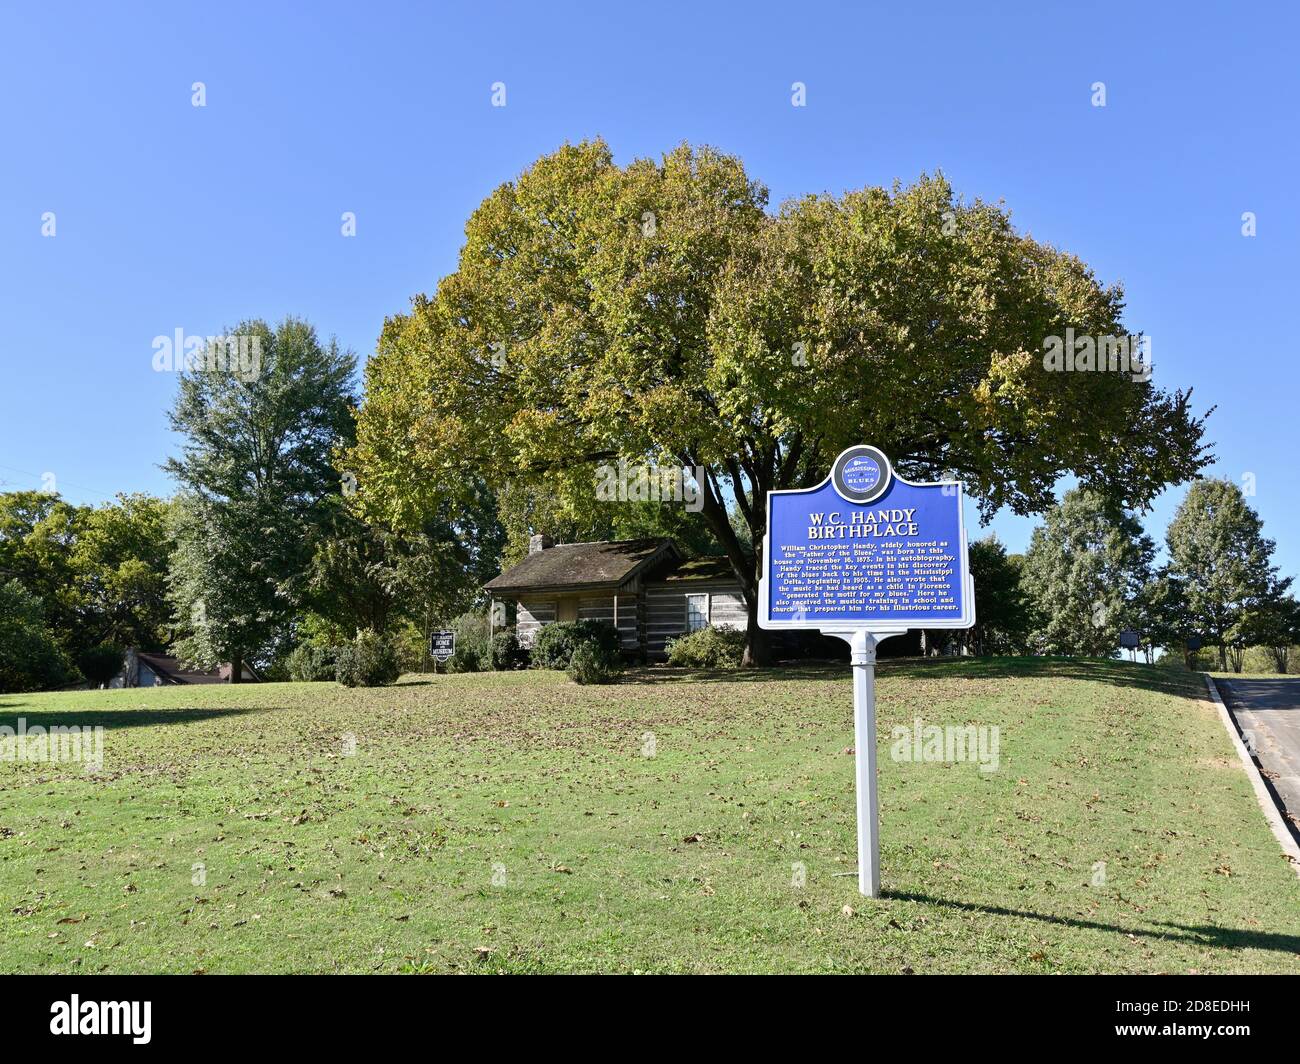 W.C. Handy, the father of the blues, music legend birthplace in Florence, Alabama, USA. Stock Photo